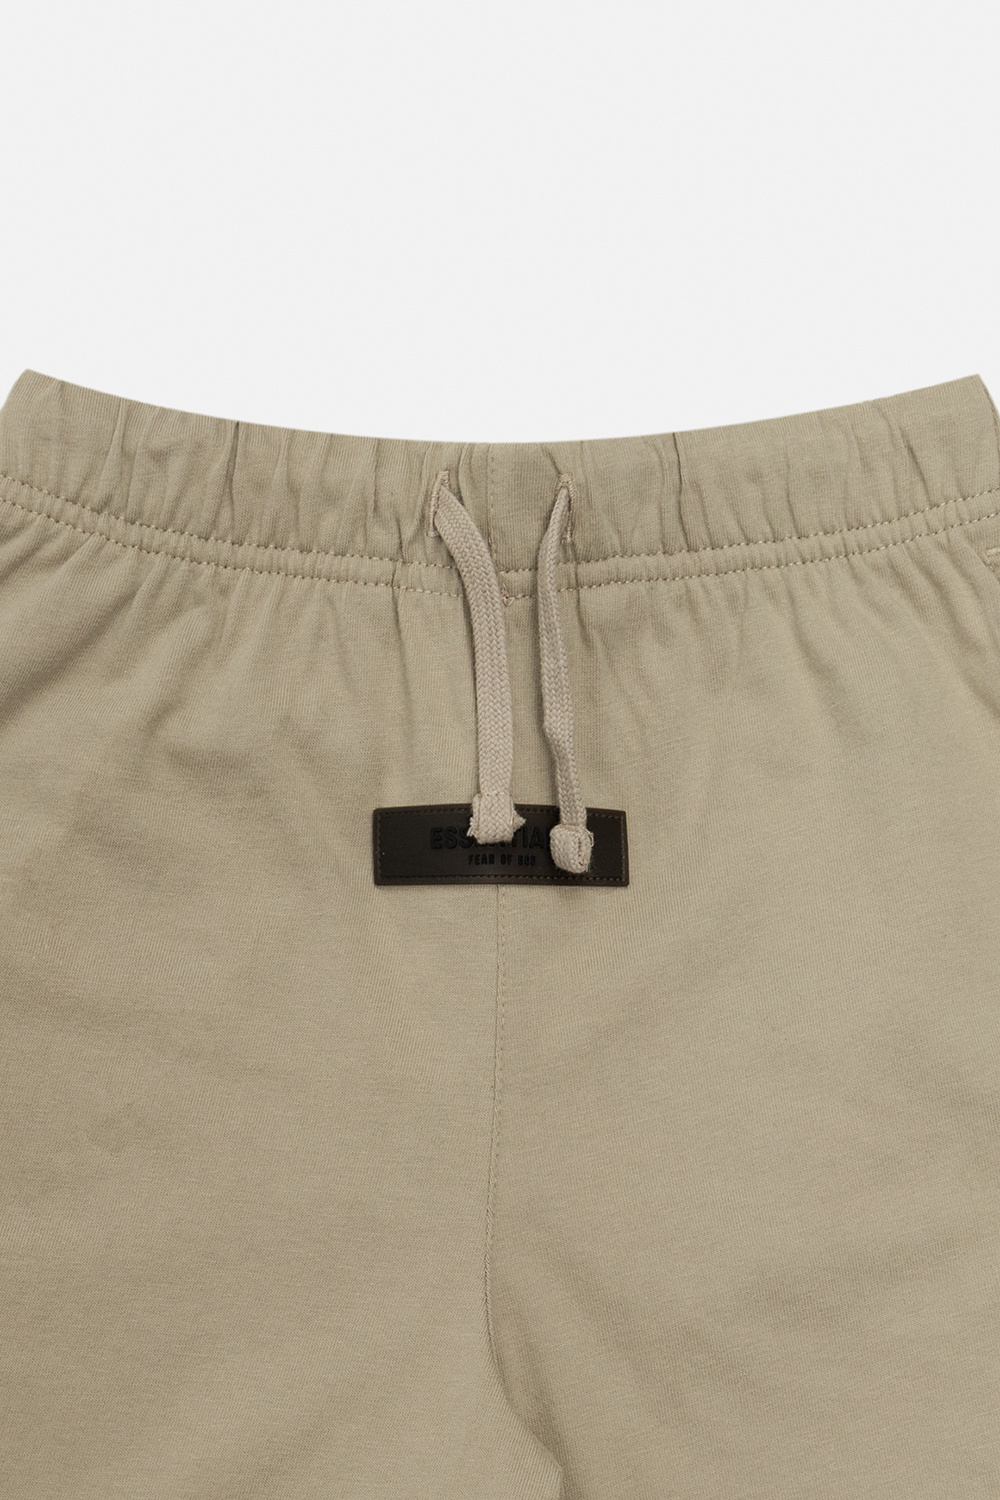 Fear Of God Essentials Kids Shorts with logo | Kids's Boys clothes